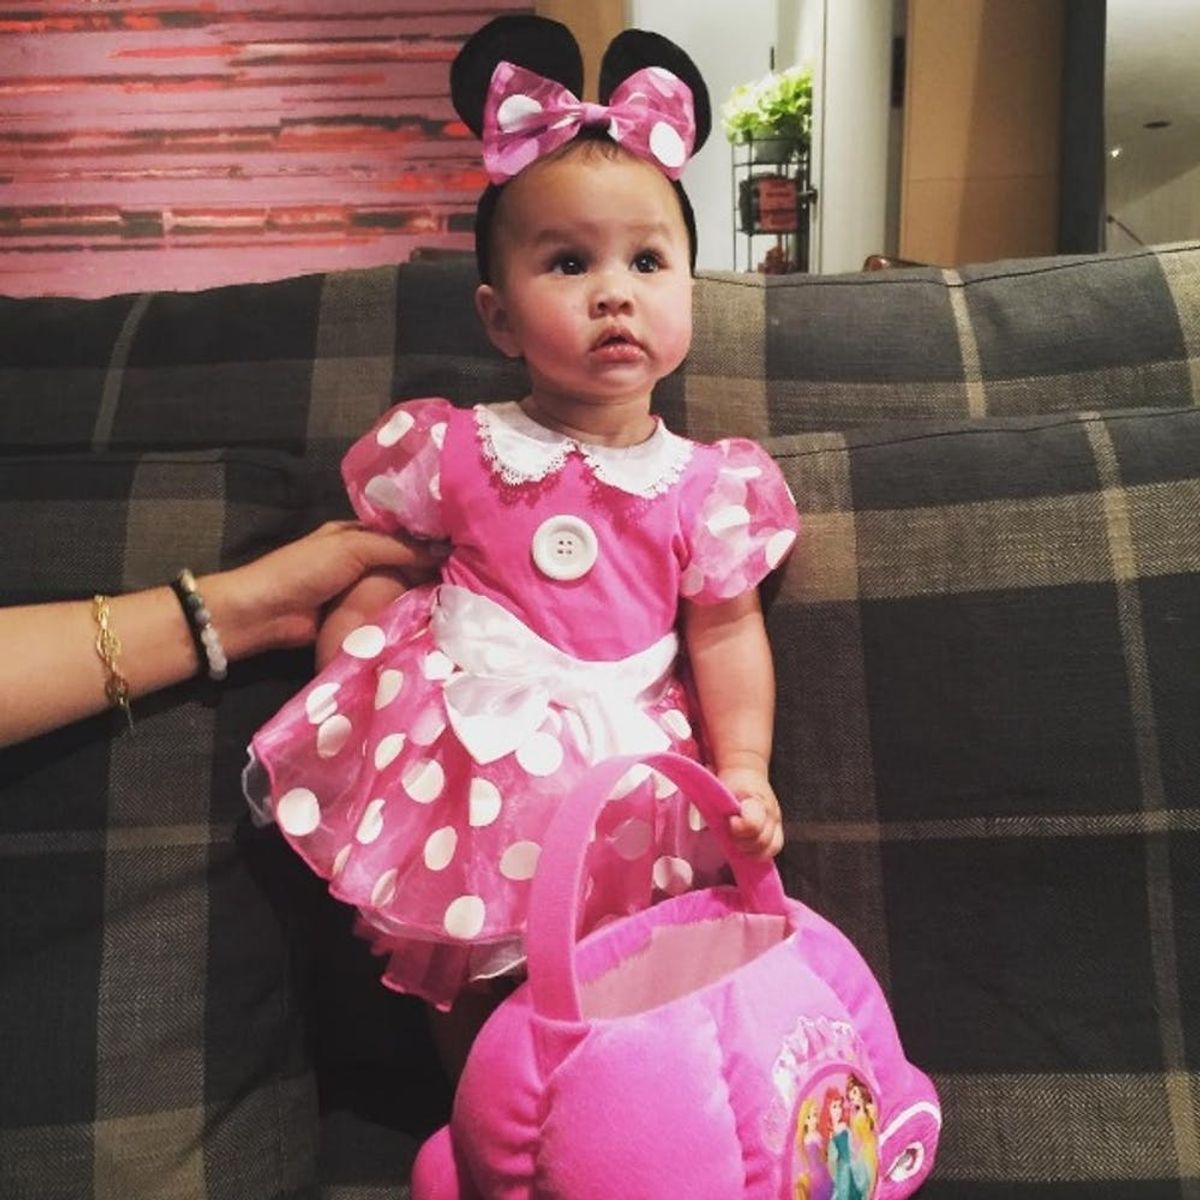 Chrissy Teigen Shuts Down the Controversy Over Baby Luna’s Free Halloween Costumes